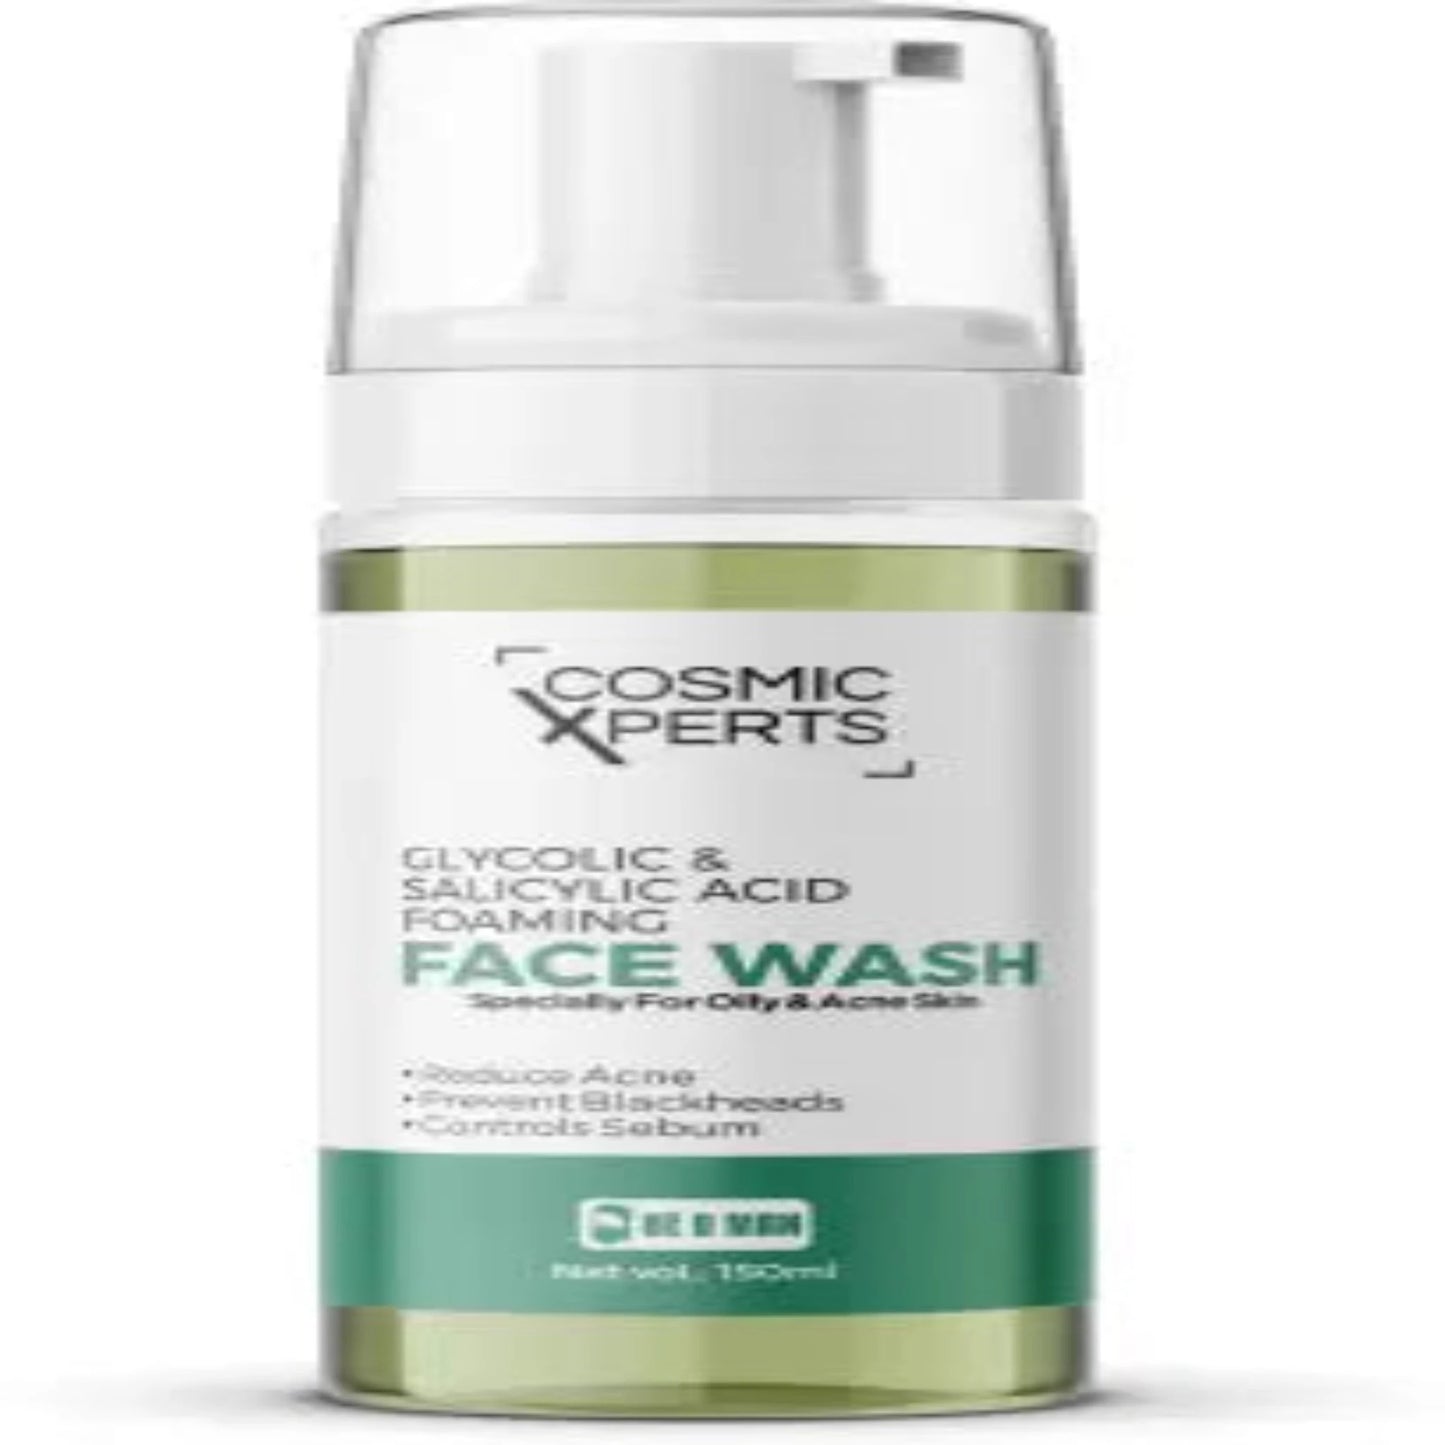 Salicylic(BHA) & Glycolic Acid(AHA) Foaming for Oily & Acne-Prone Skin | Fades Blemishes, Reduces Breakouts |Men & Women|Skin Care Products|150ml Face Wash